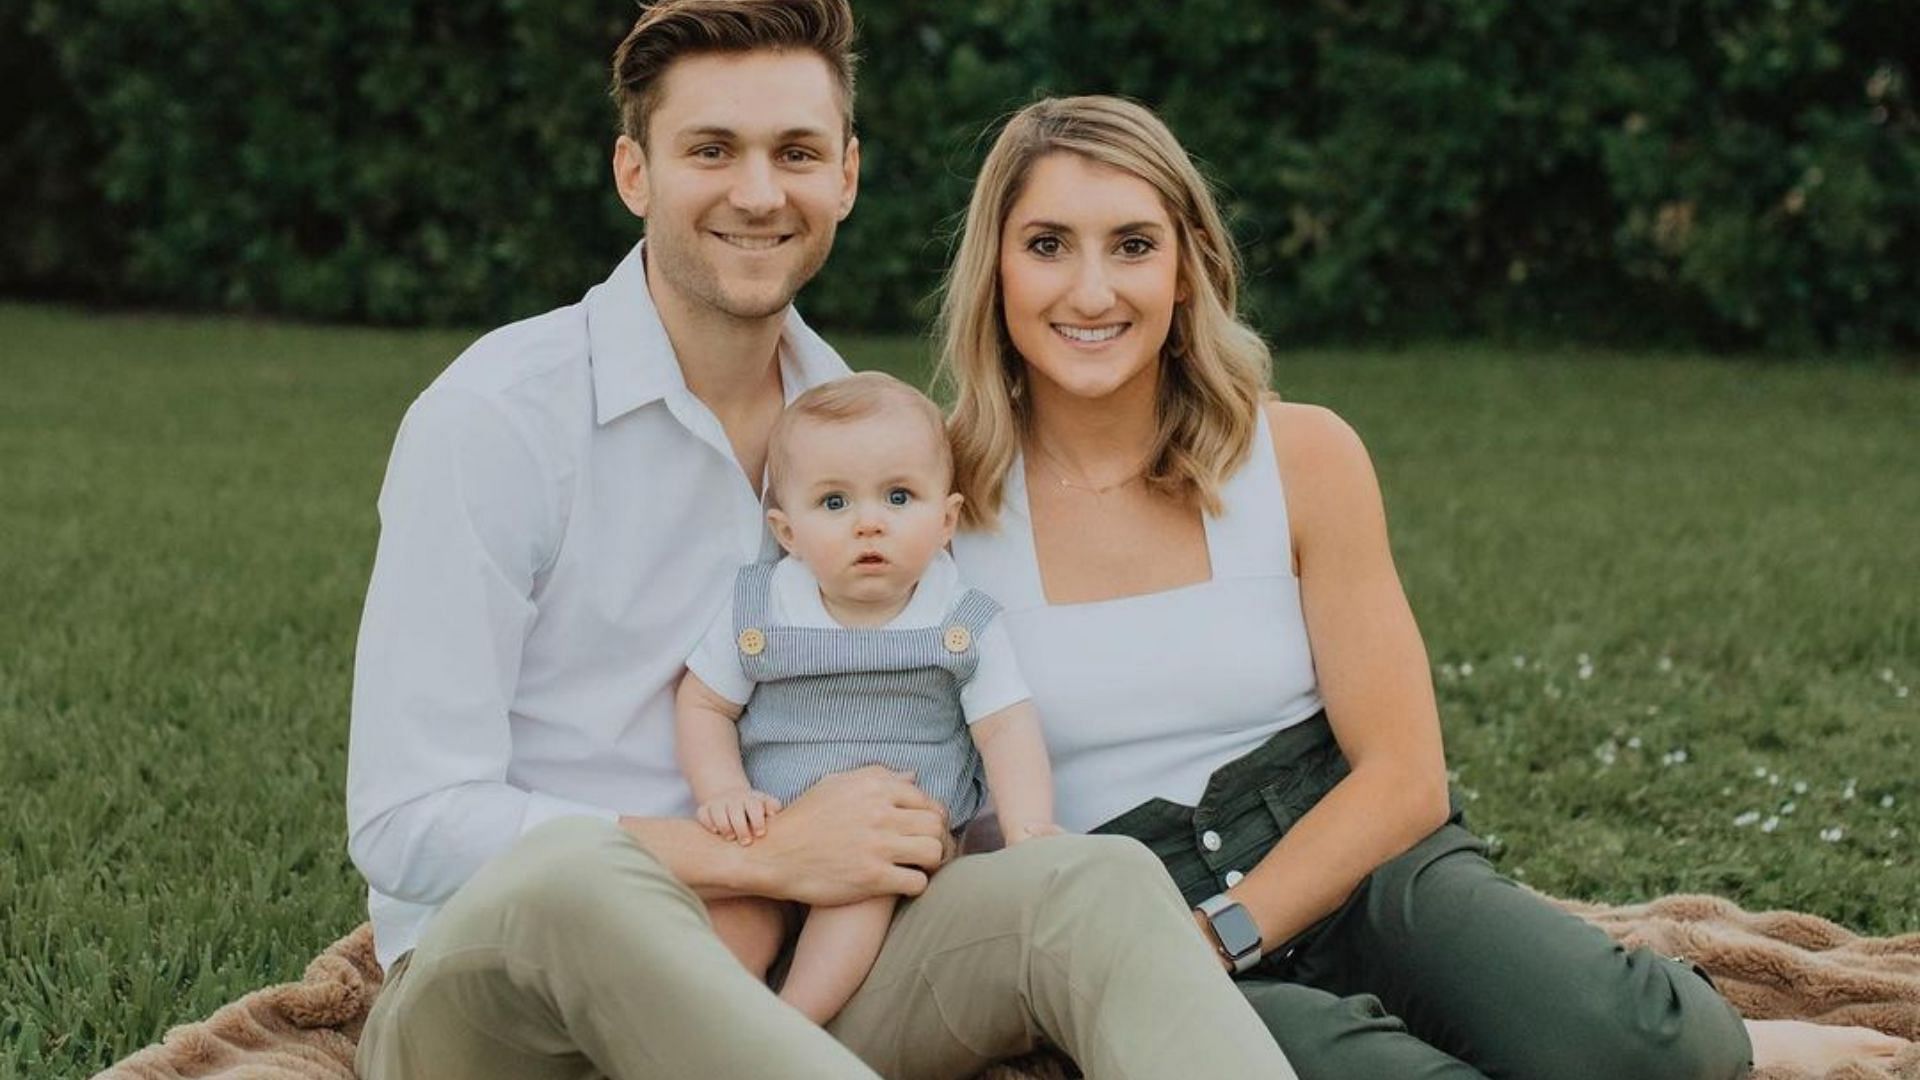 MLB player Trea Turner with his wife and son.